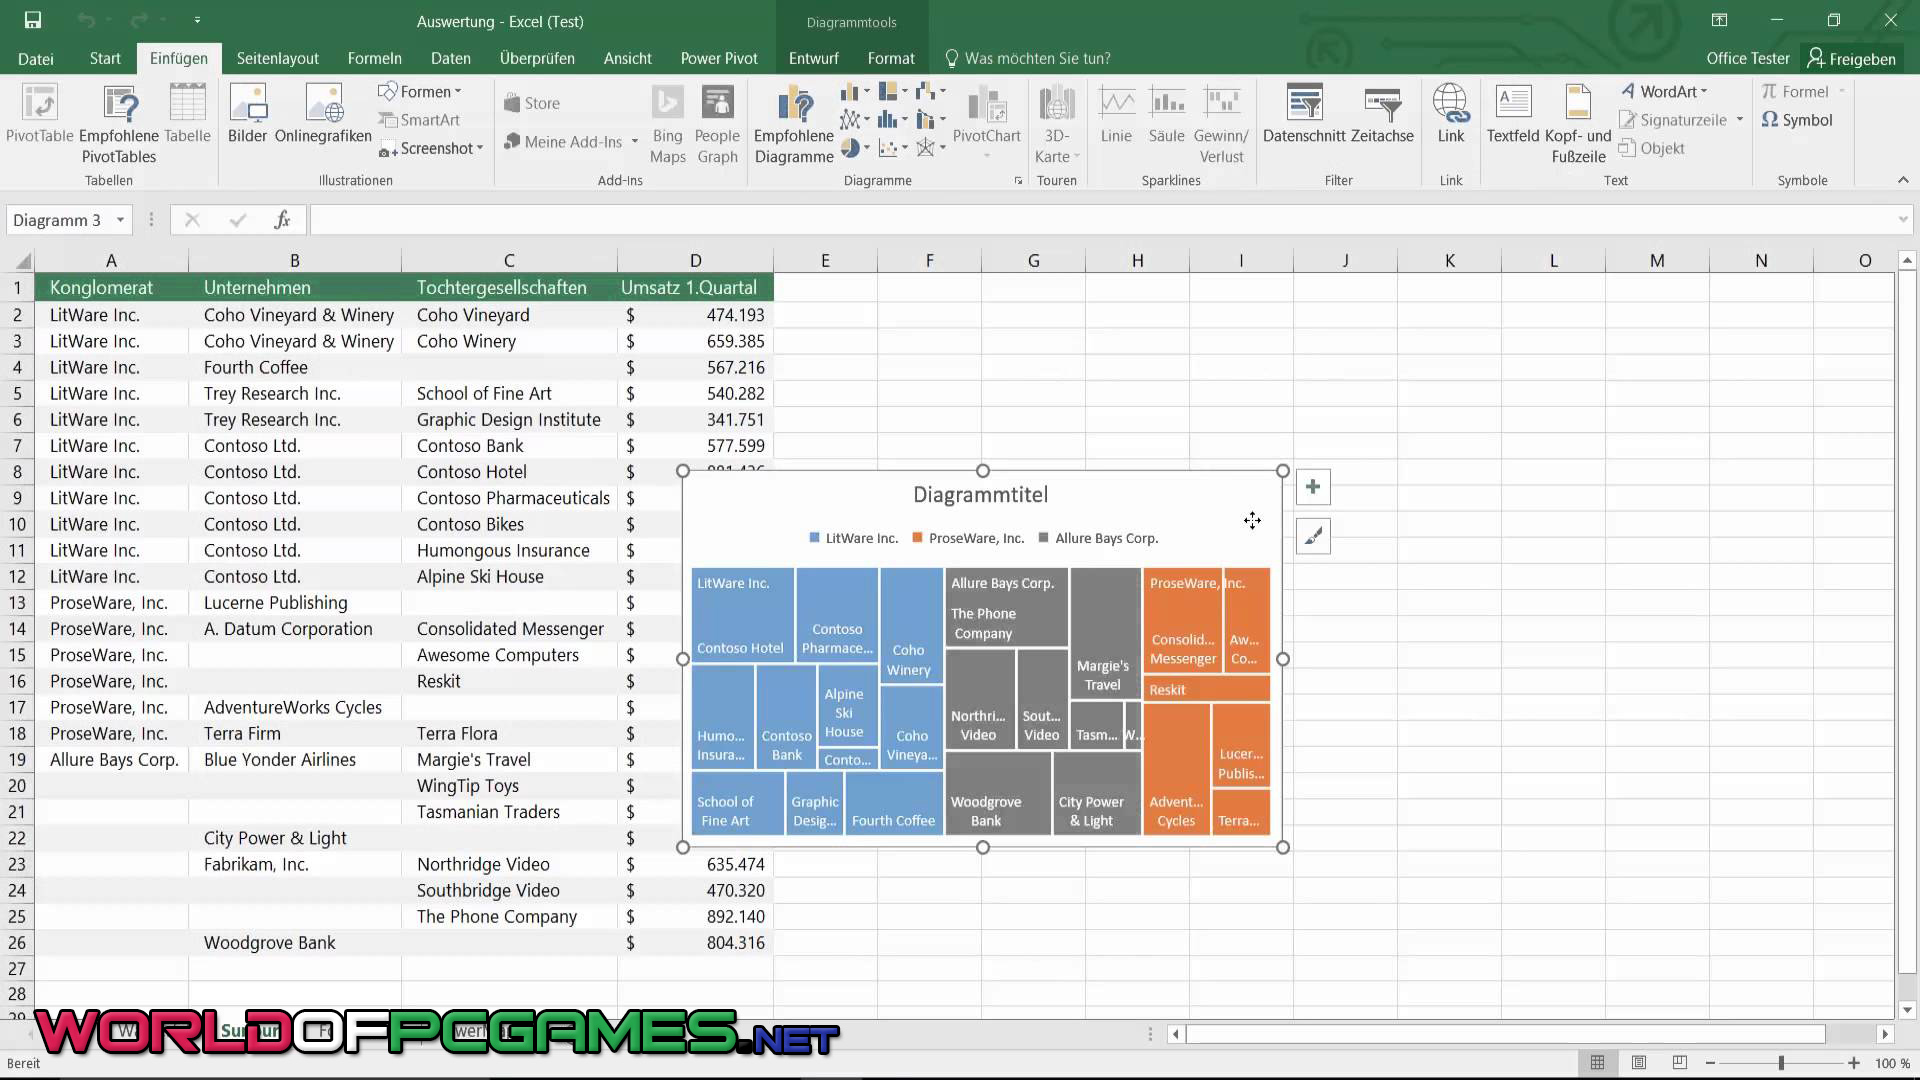 Microsoft Office 2016 For MAC Free Download By worldof-pcgames.net